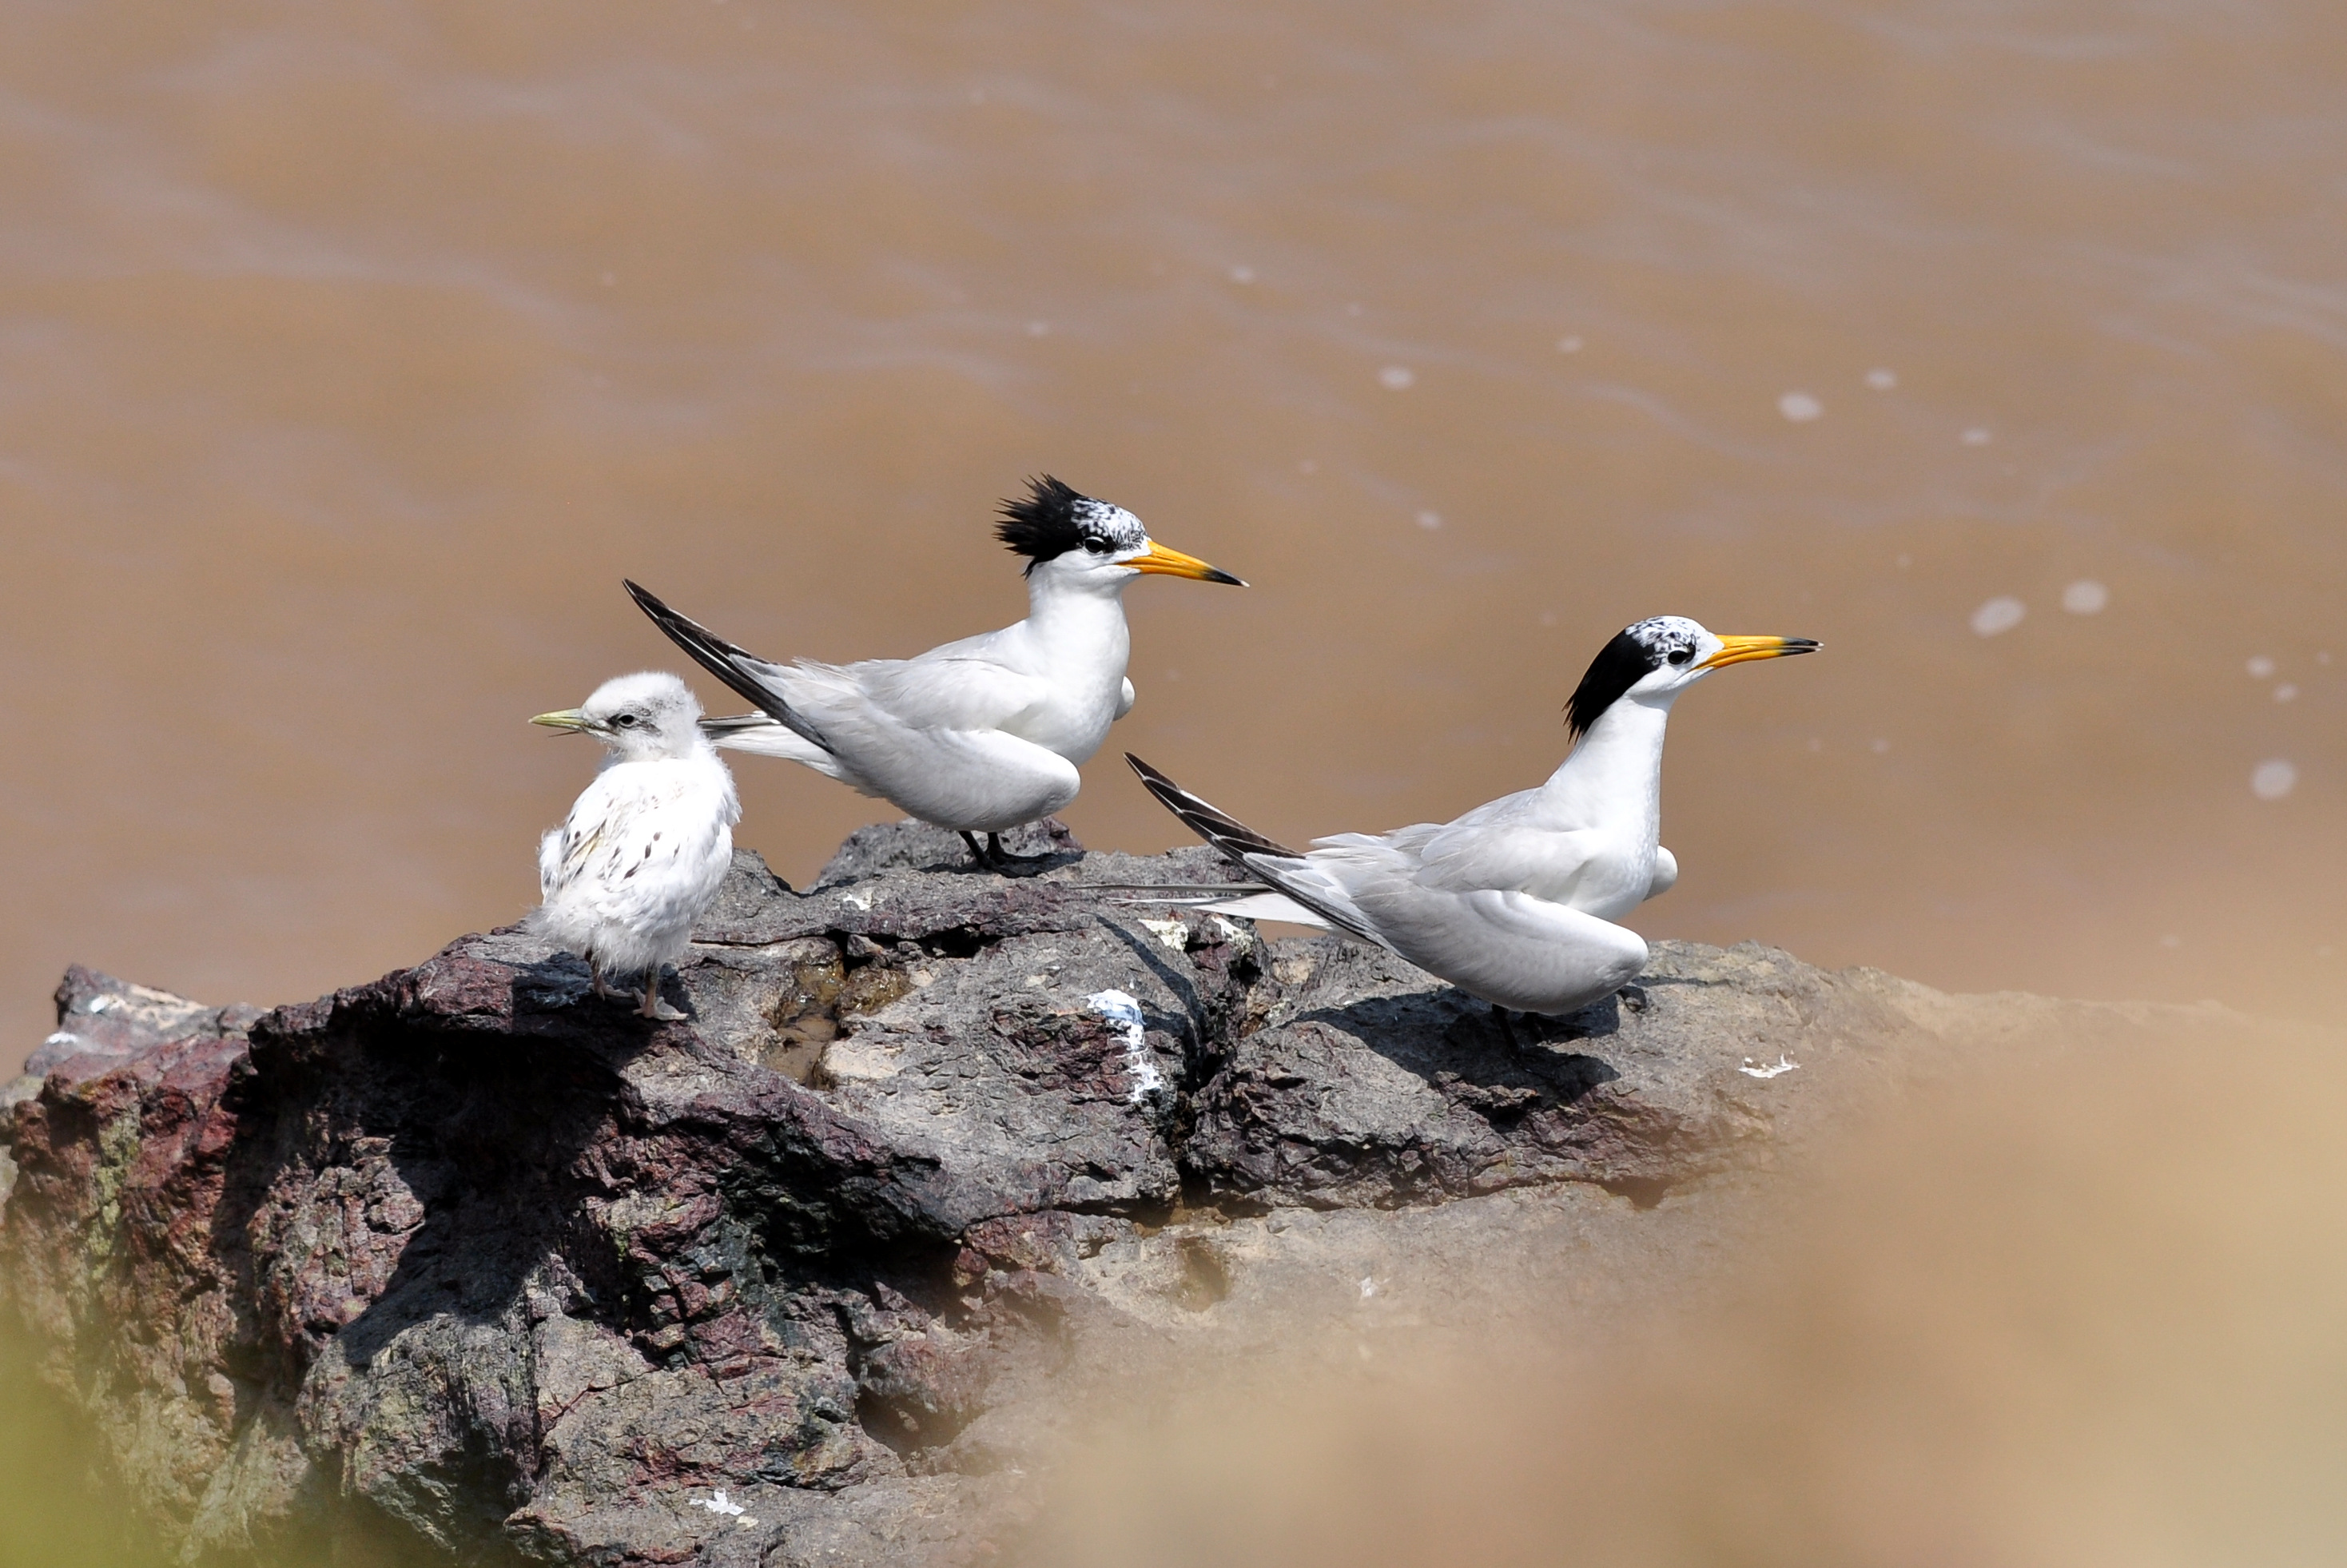 The 'Mythical Bird' Chinese Crested Tern Receives Worldwide Attention Thanks to National Taiwan University